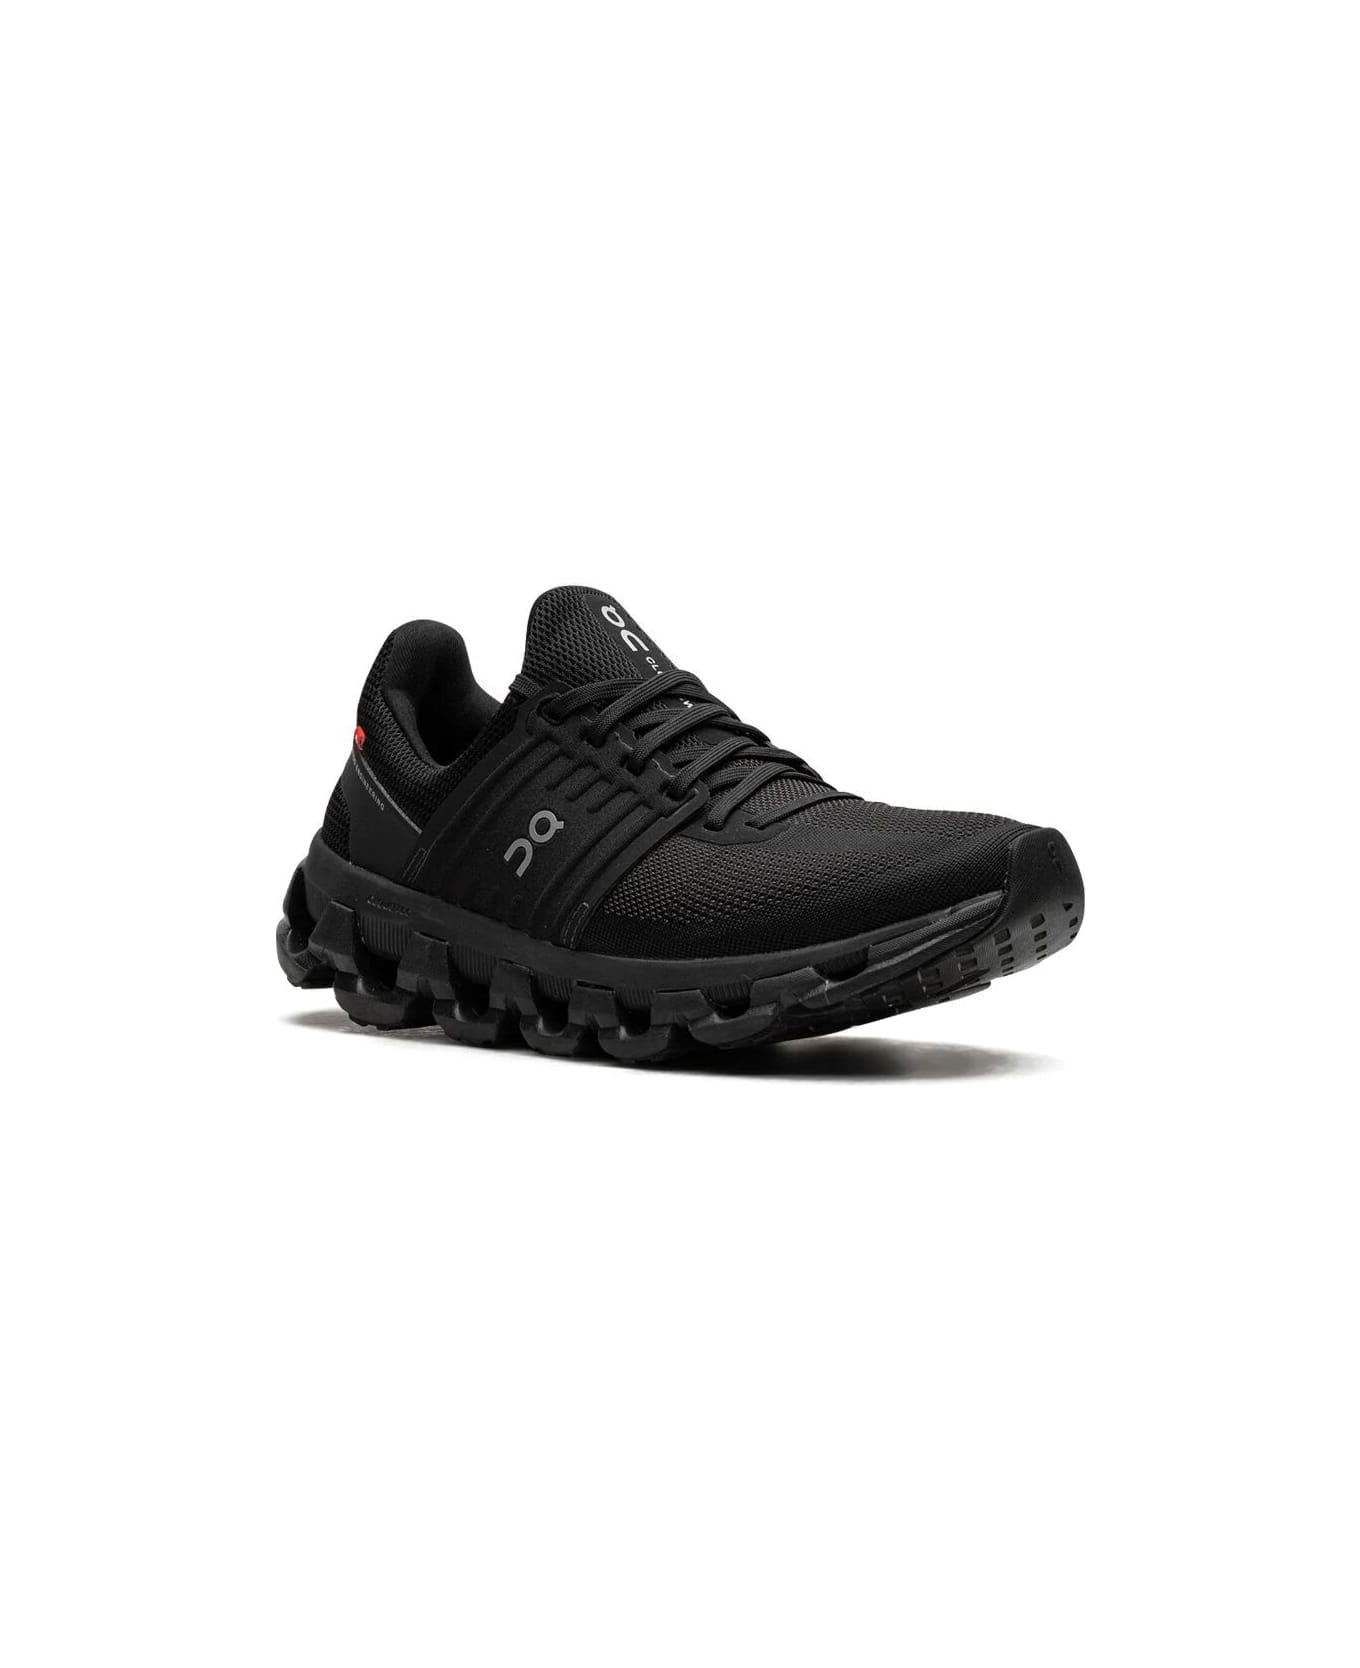 ON Cloudswift 3 Ad Sneakers - All Black